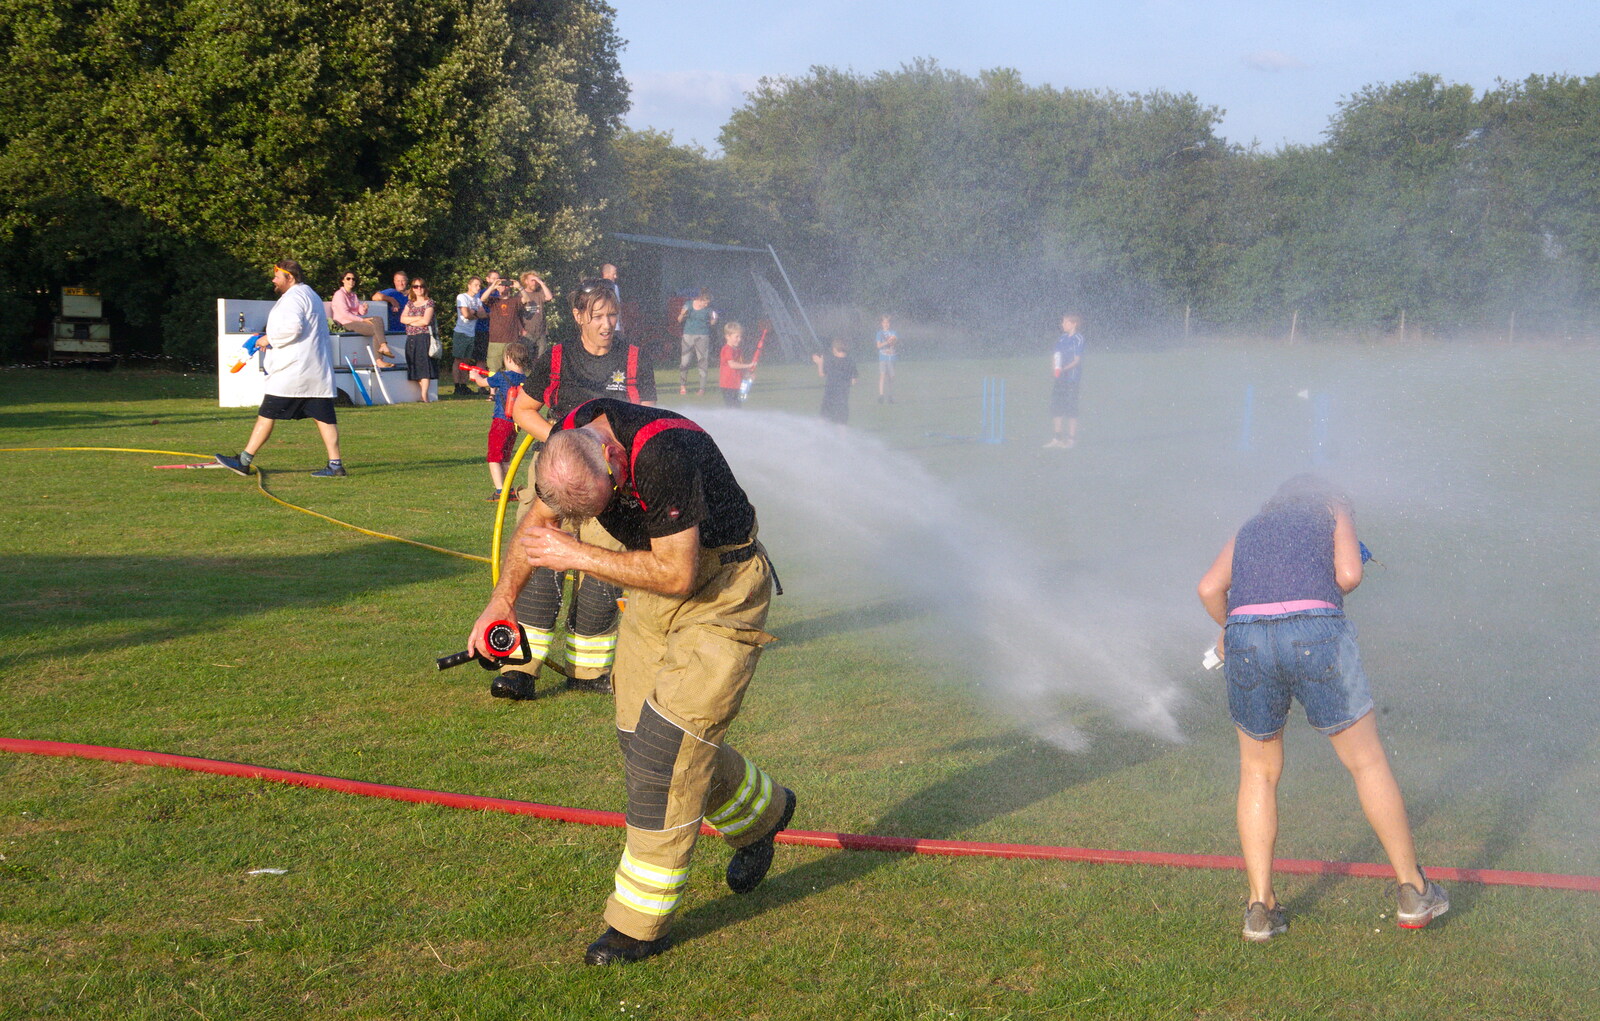 Even the fire-fighters are not immune from A Water Fight with a Fire Engine, Eye Cricket Club, Suffolk - 5th August 2019